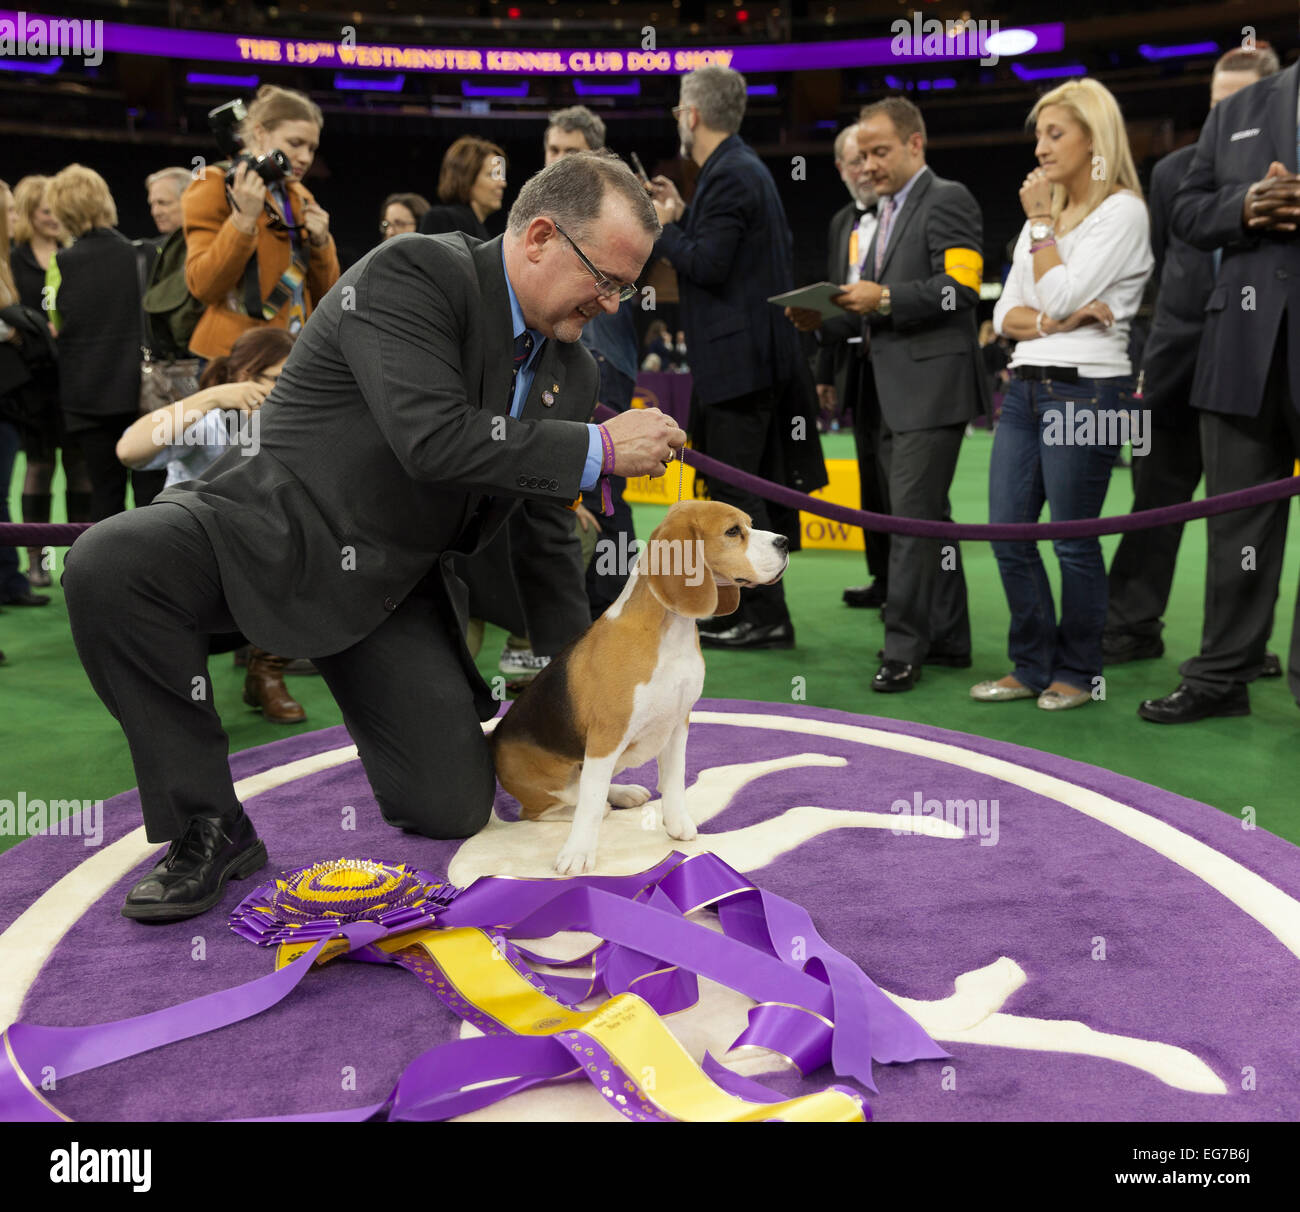 New York, NY - February 17, 2015: Best of Show Hound 15 inch Beagle Miss P poses with handler William Alexandre at 139 Westminster Kennel Club dog show at Madison Square Garden Stock Photo